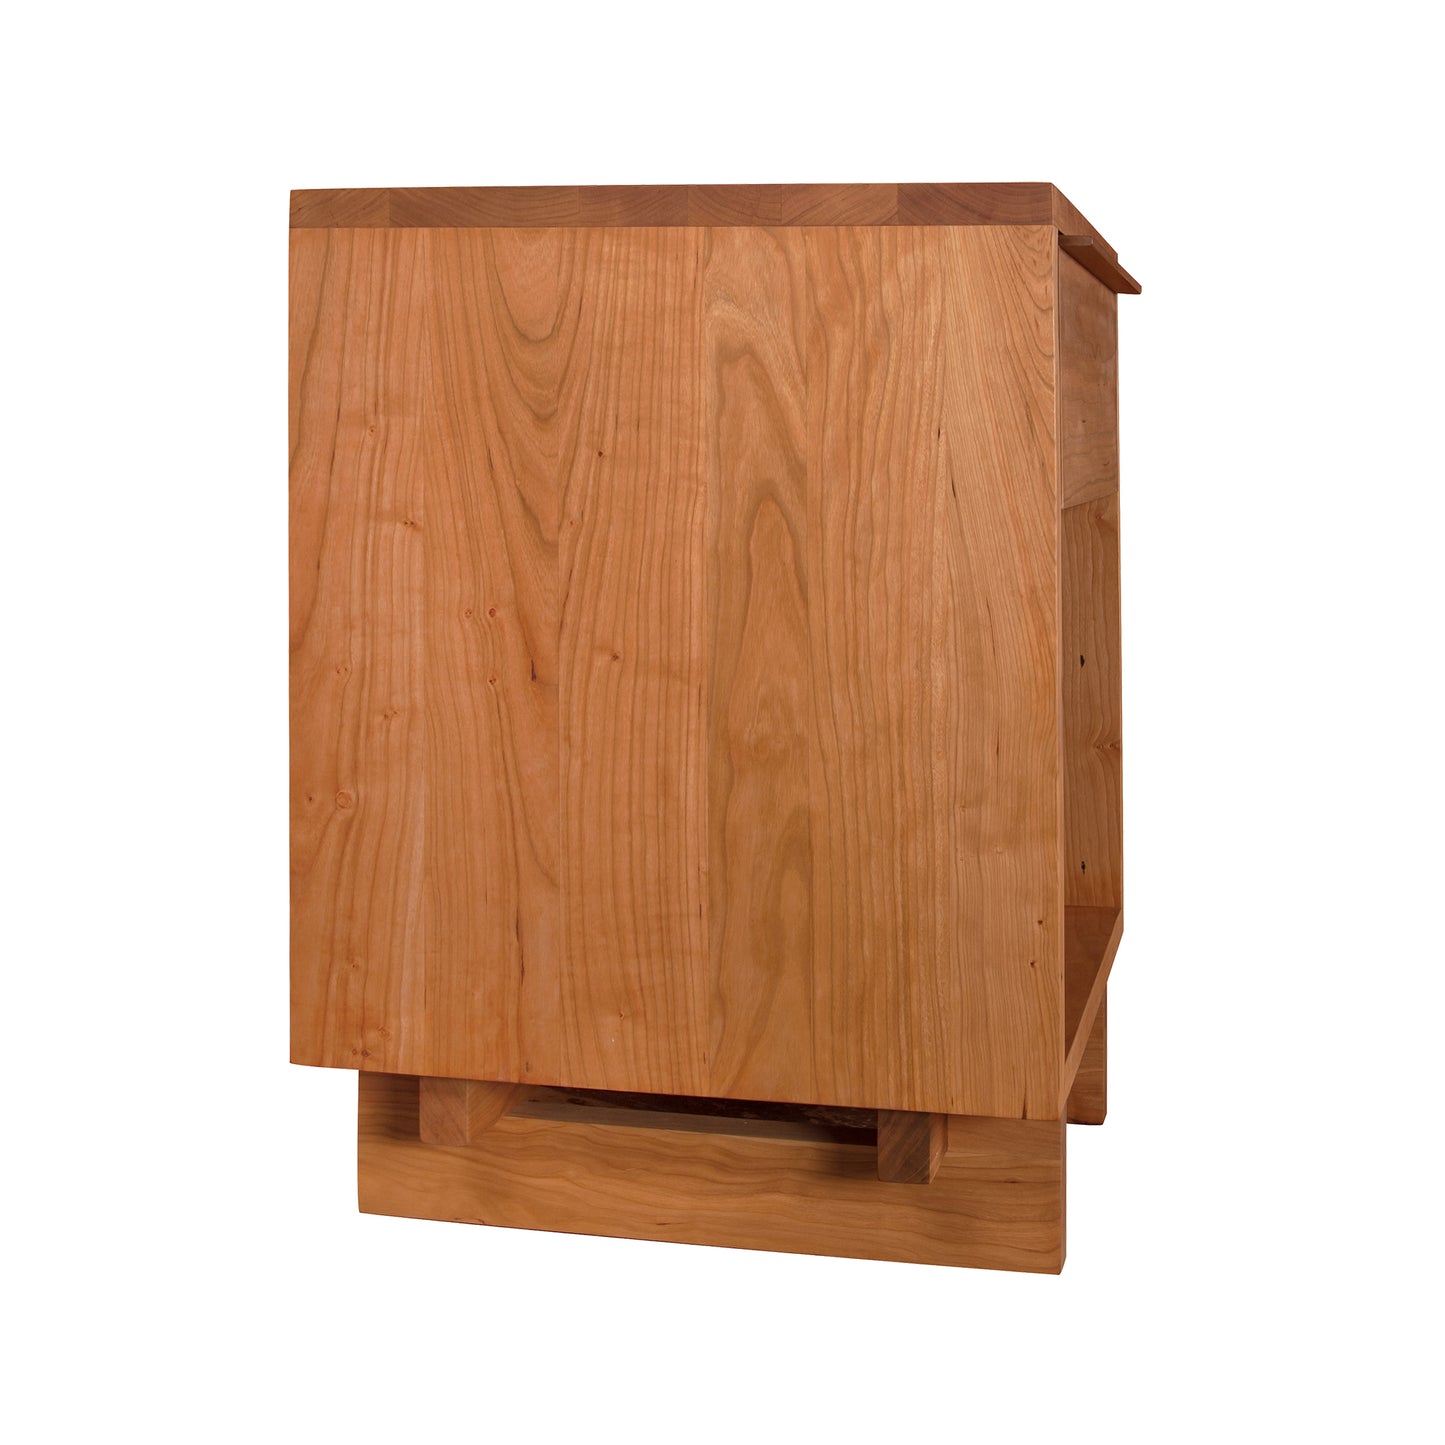 The Vermont Furniture Designs Kipling 1-Drawer Enclosed Shelf Nightstand is a beautiful piece of fine furniture for natural wood lovers.